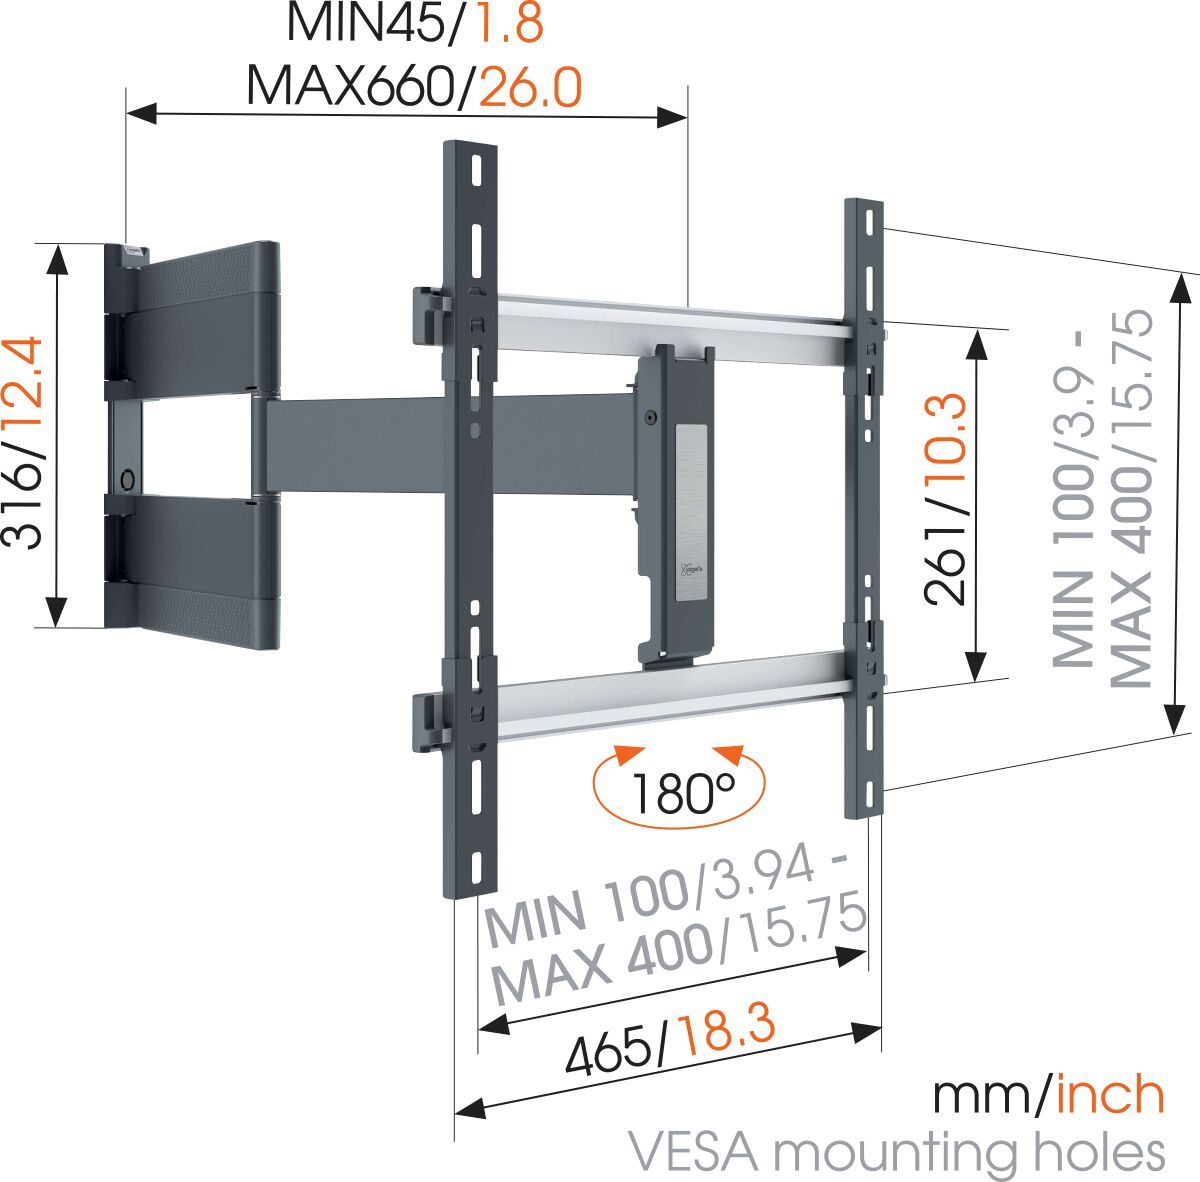 Vogel's THIN 546 ExtraThin Full-Motion TV Wall Mount for OLED TVs (black) - Suitable for 40 up to 65 inch TVs - Full motion (up to 180°) - Dimensions